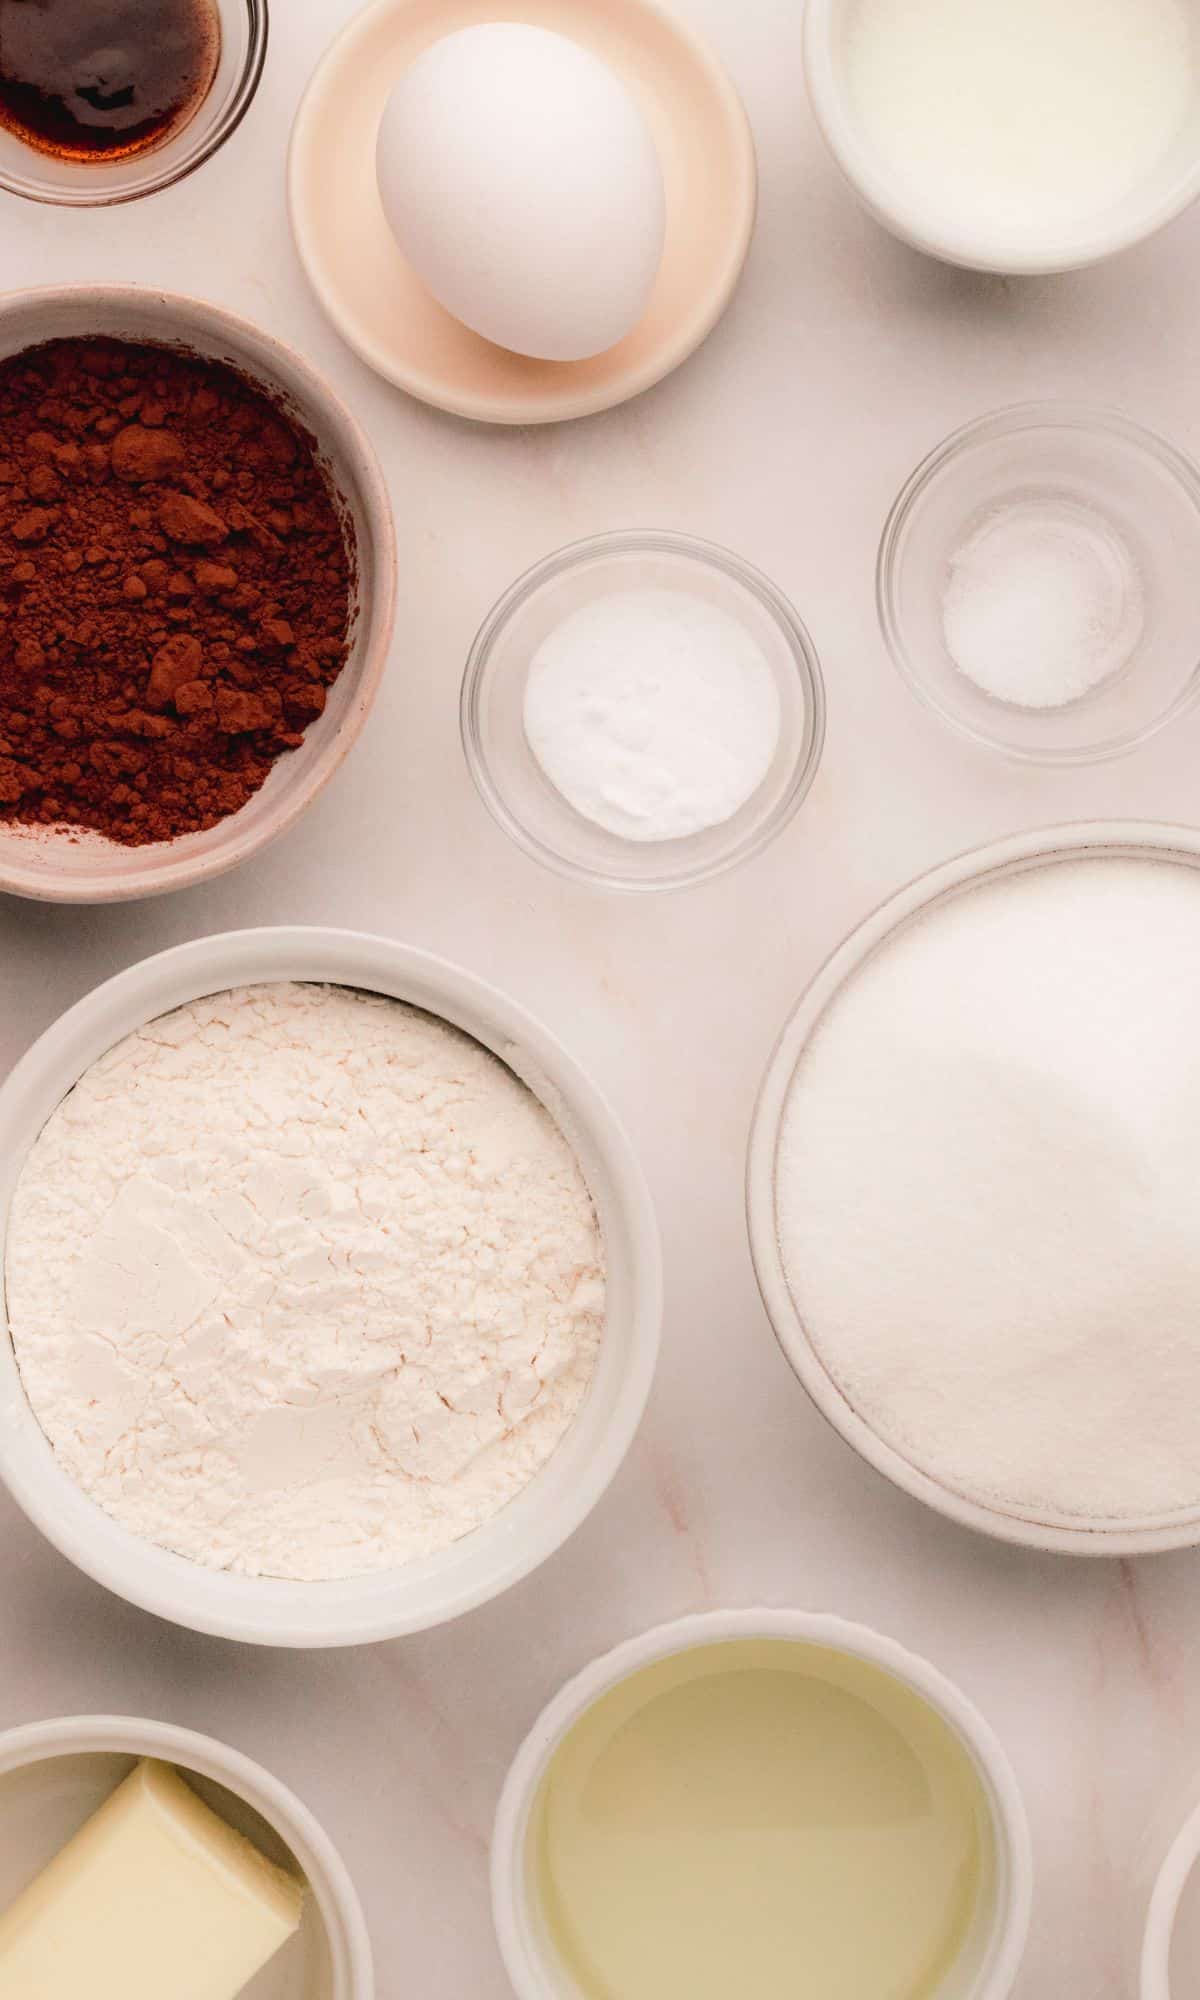 Chocolate cupcake ingredients in varying bowl shapes and sizes.